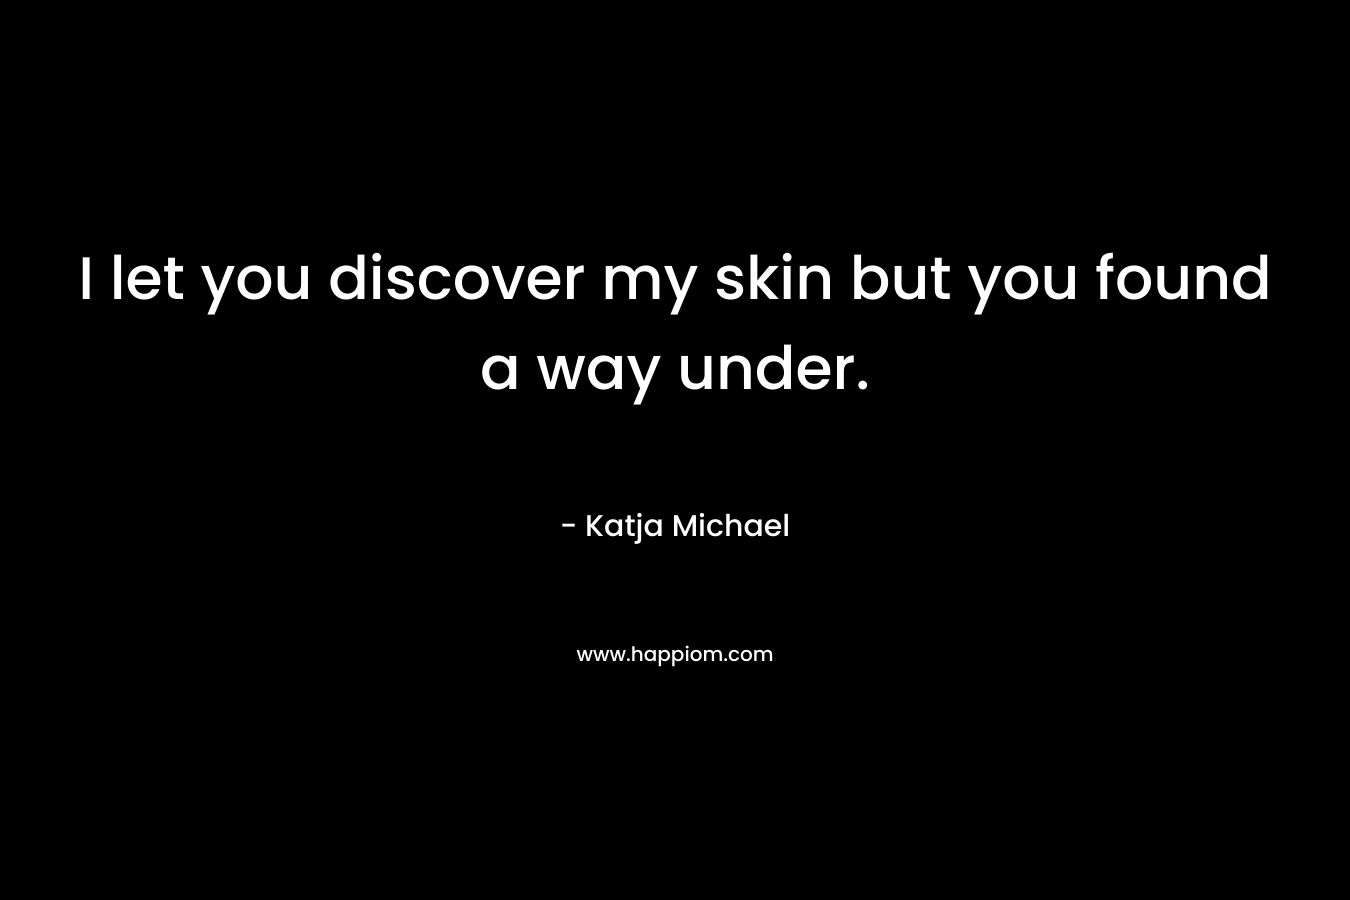 I let you discover my skin but you found a way under. – Katja Michael